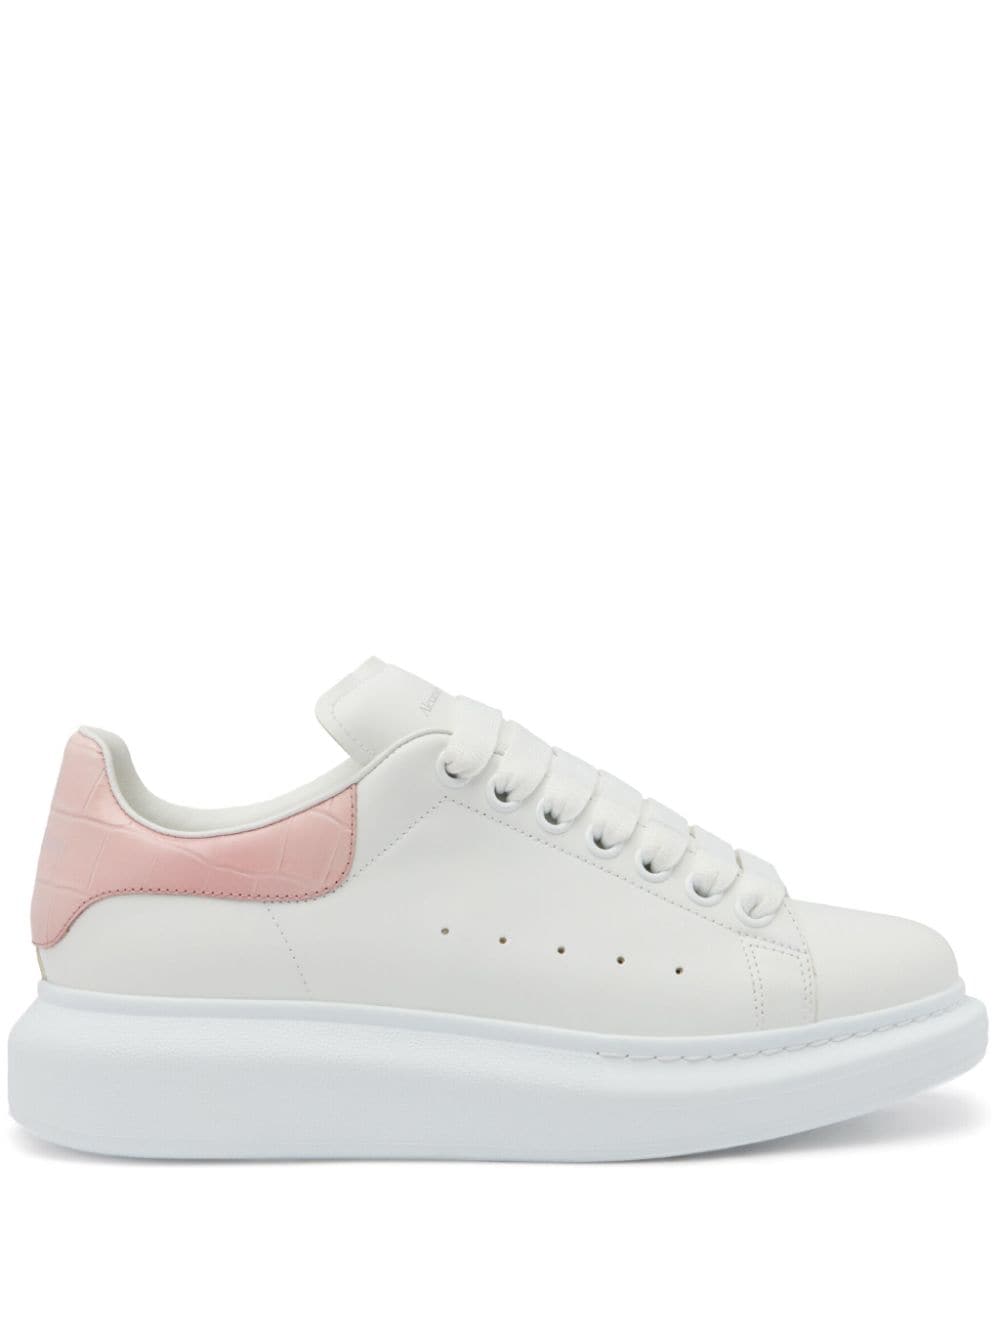 Oversized leather sneakers<BR/><BR/><BR/>